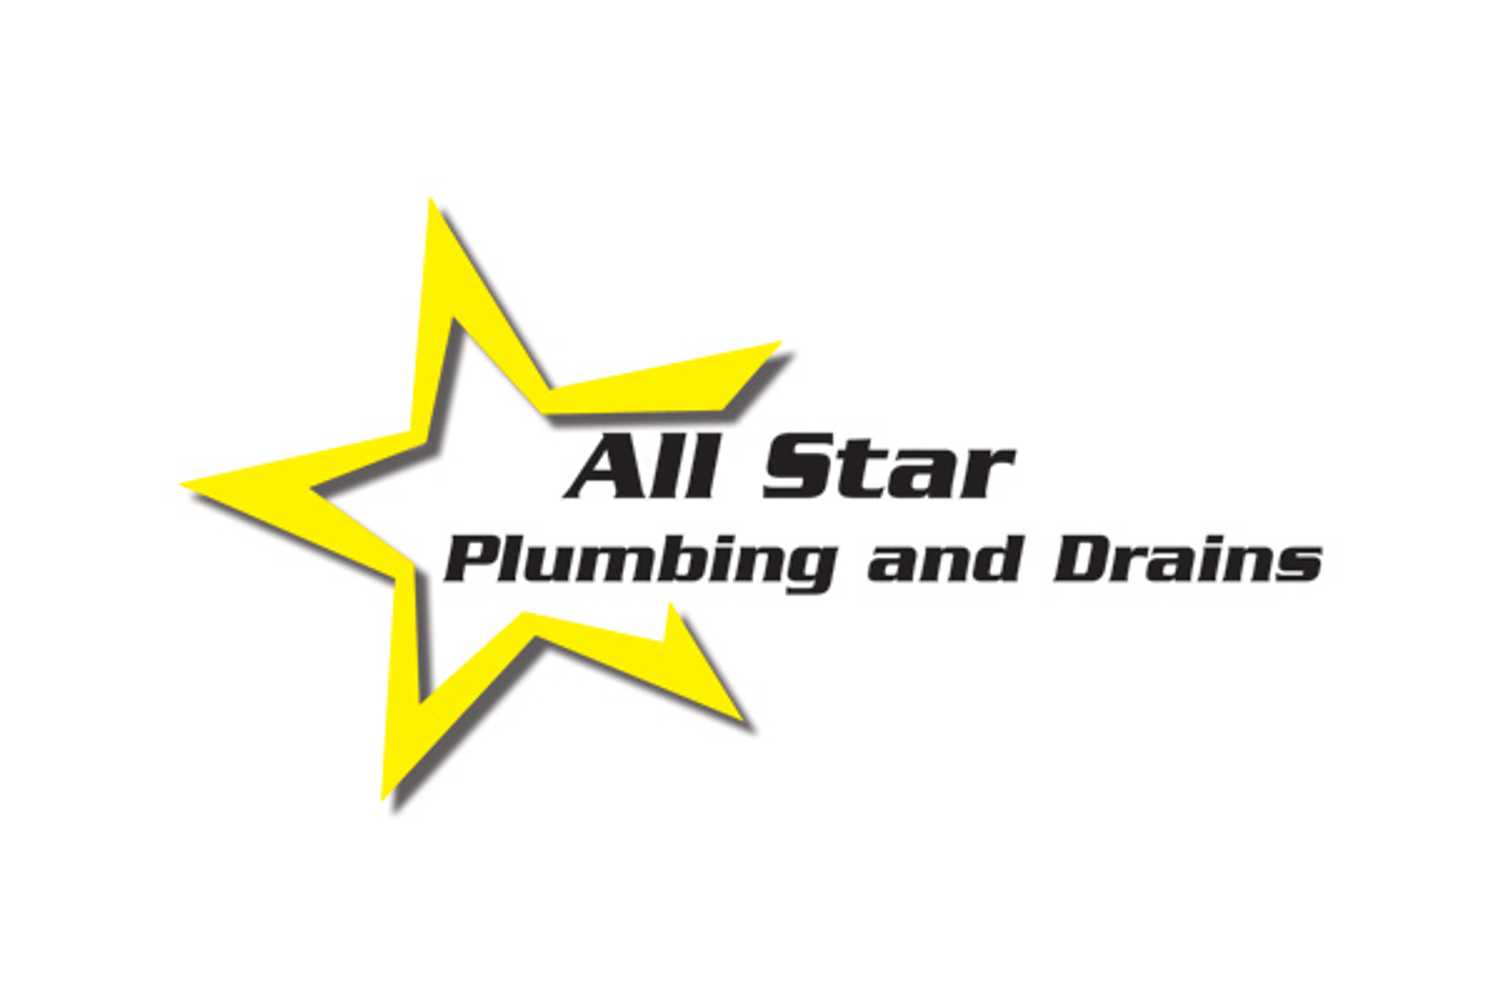 All Star Plumbing and Drains Project